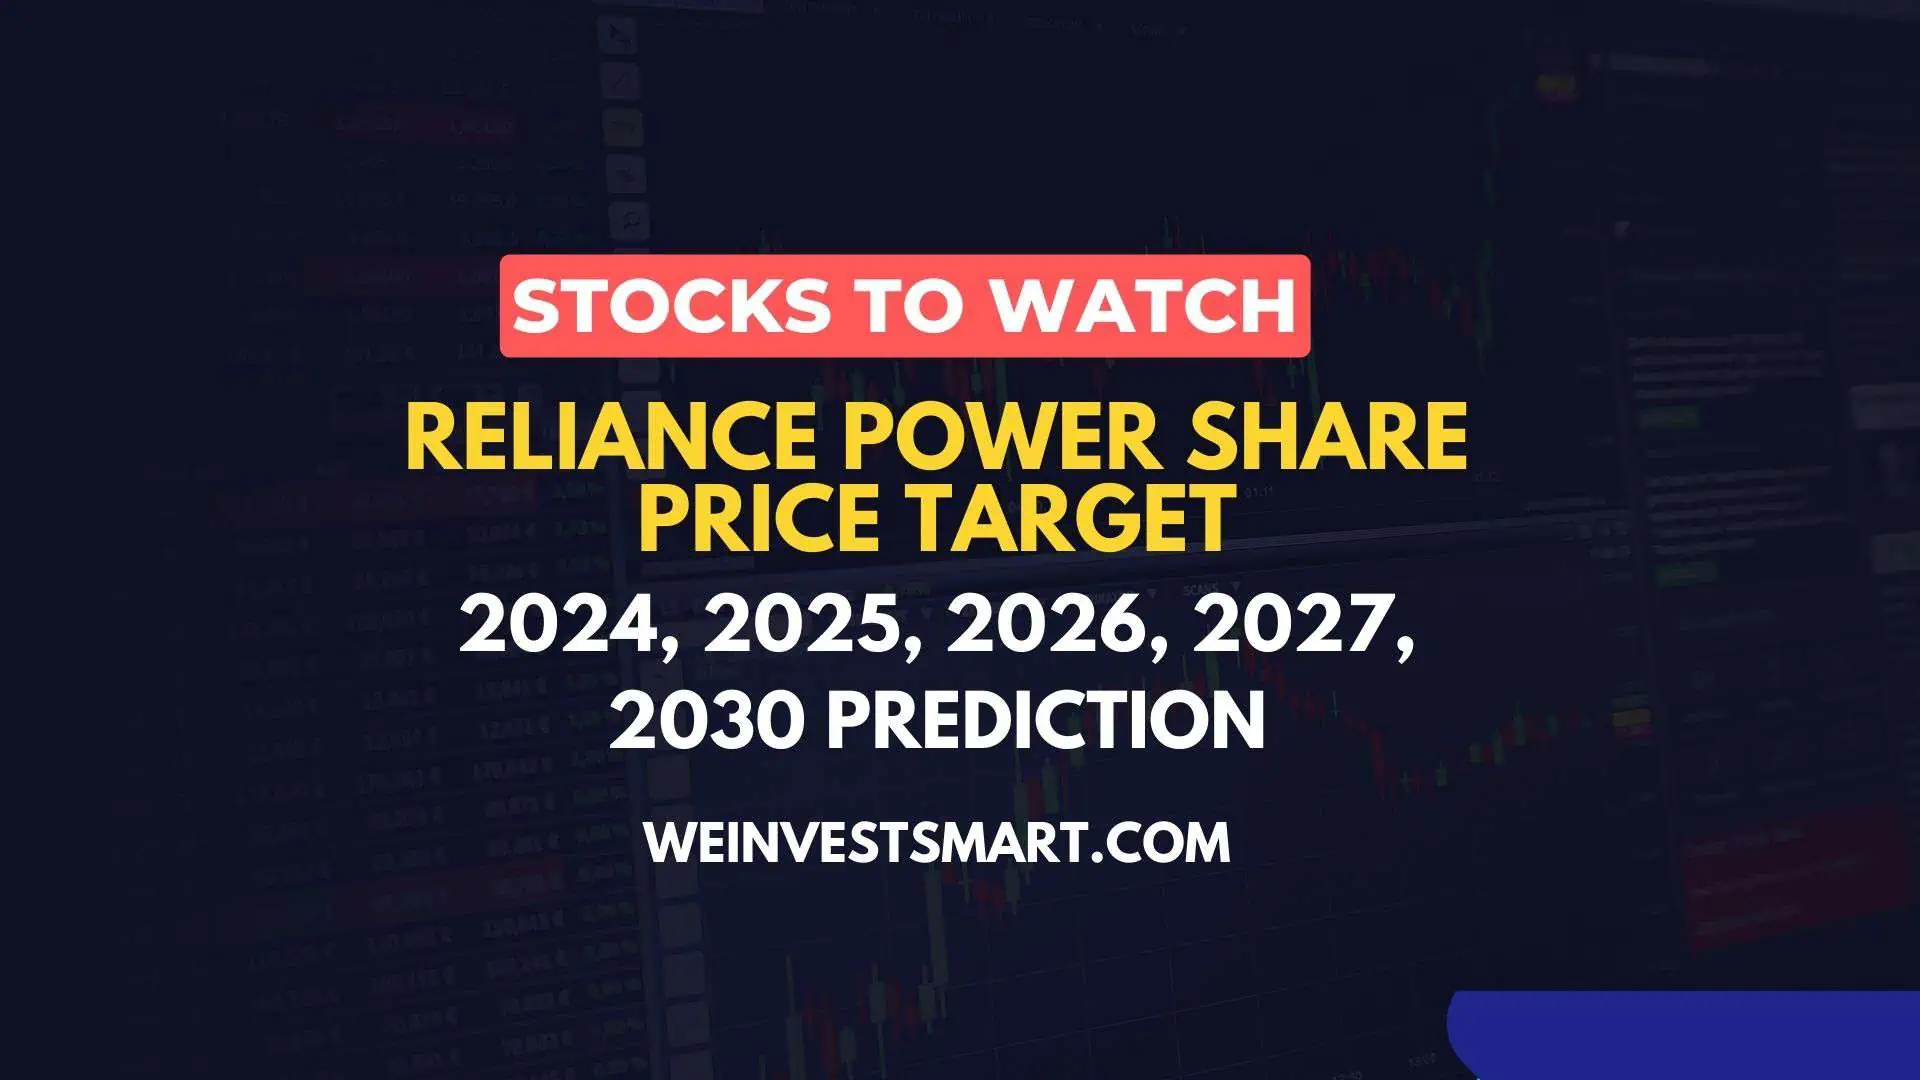 Reliance Power share price target 2024, 20255, 2026, 2027, 2030 prediction